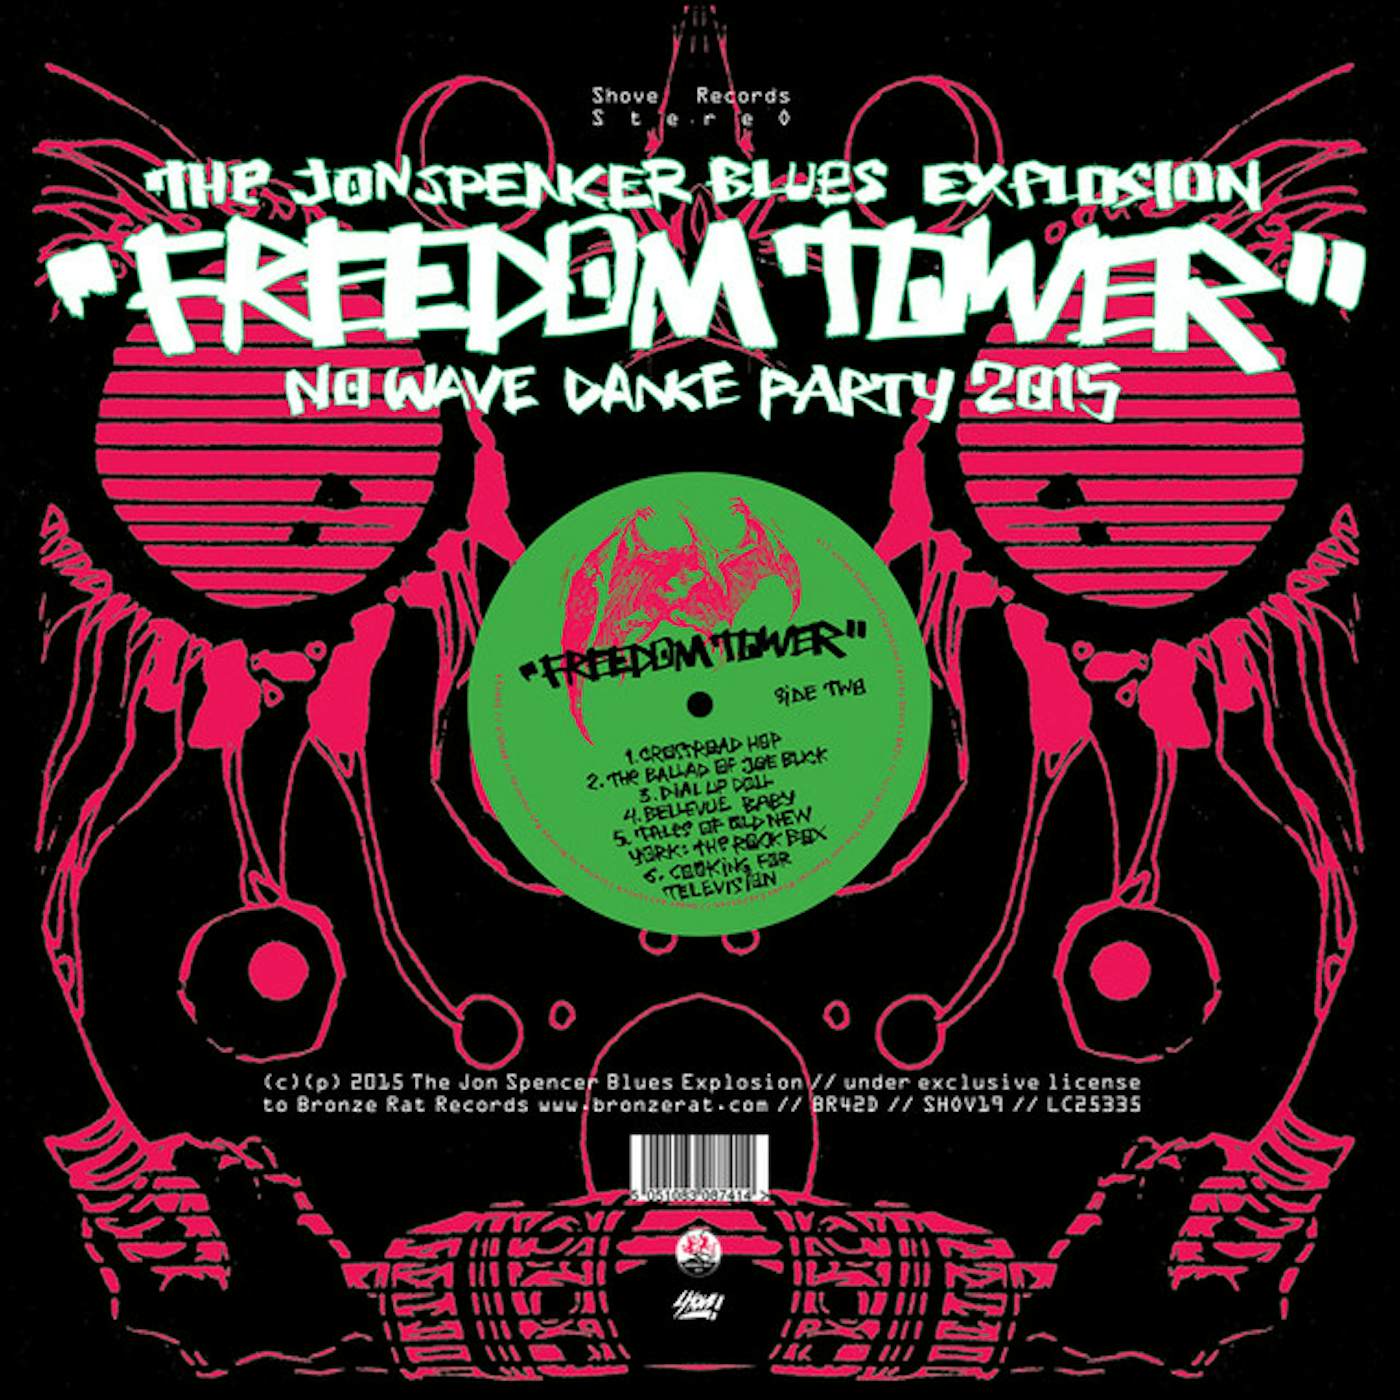 The Jon Spencer Blues Explosion FREEDOM TOWER: NO WAVE DANCE PARTY 2015 Vinyl Record